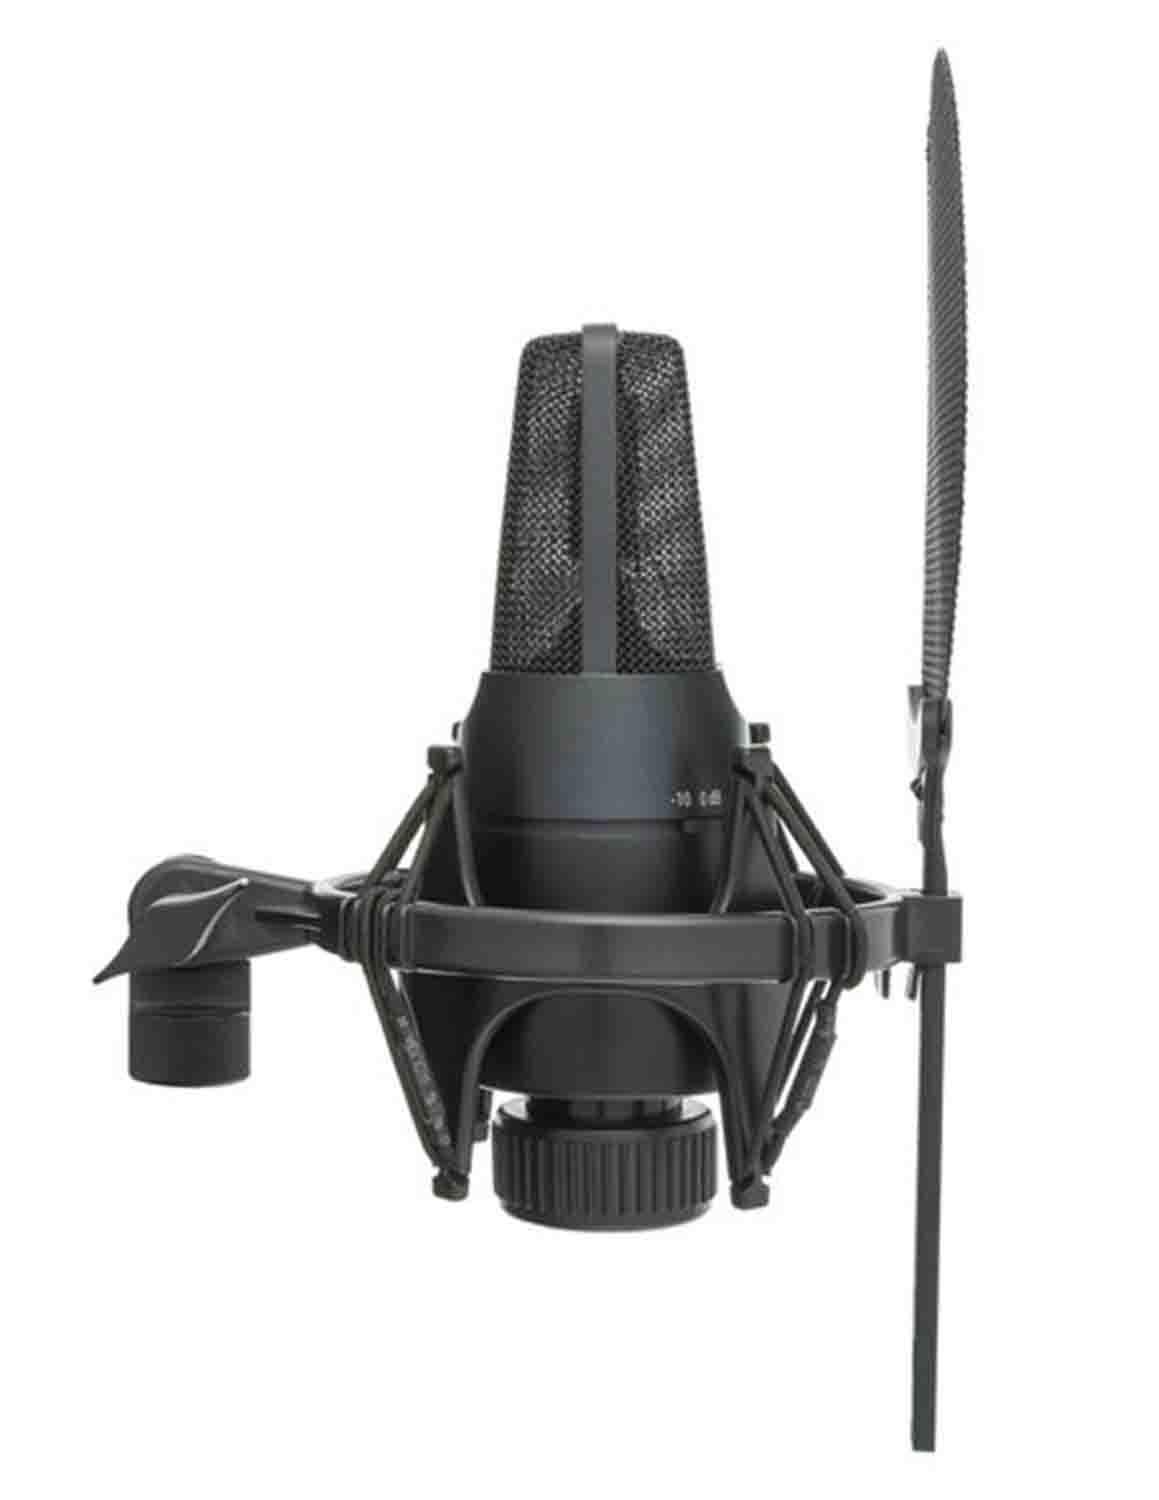 sE Electronics X1 S Vocal Pack Microphone with Shockmount and Cable - Hollywood DJ